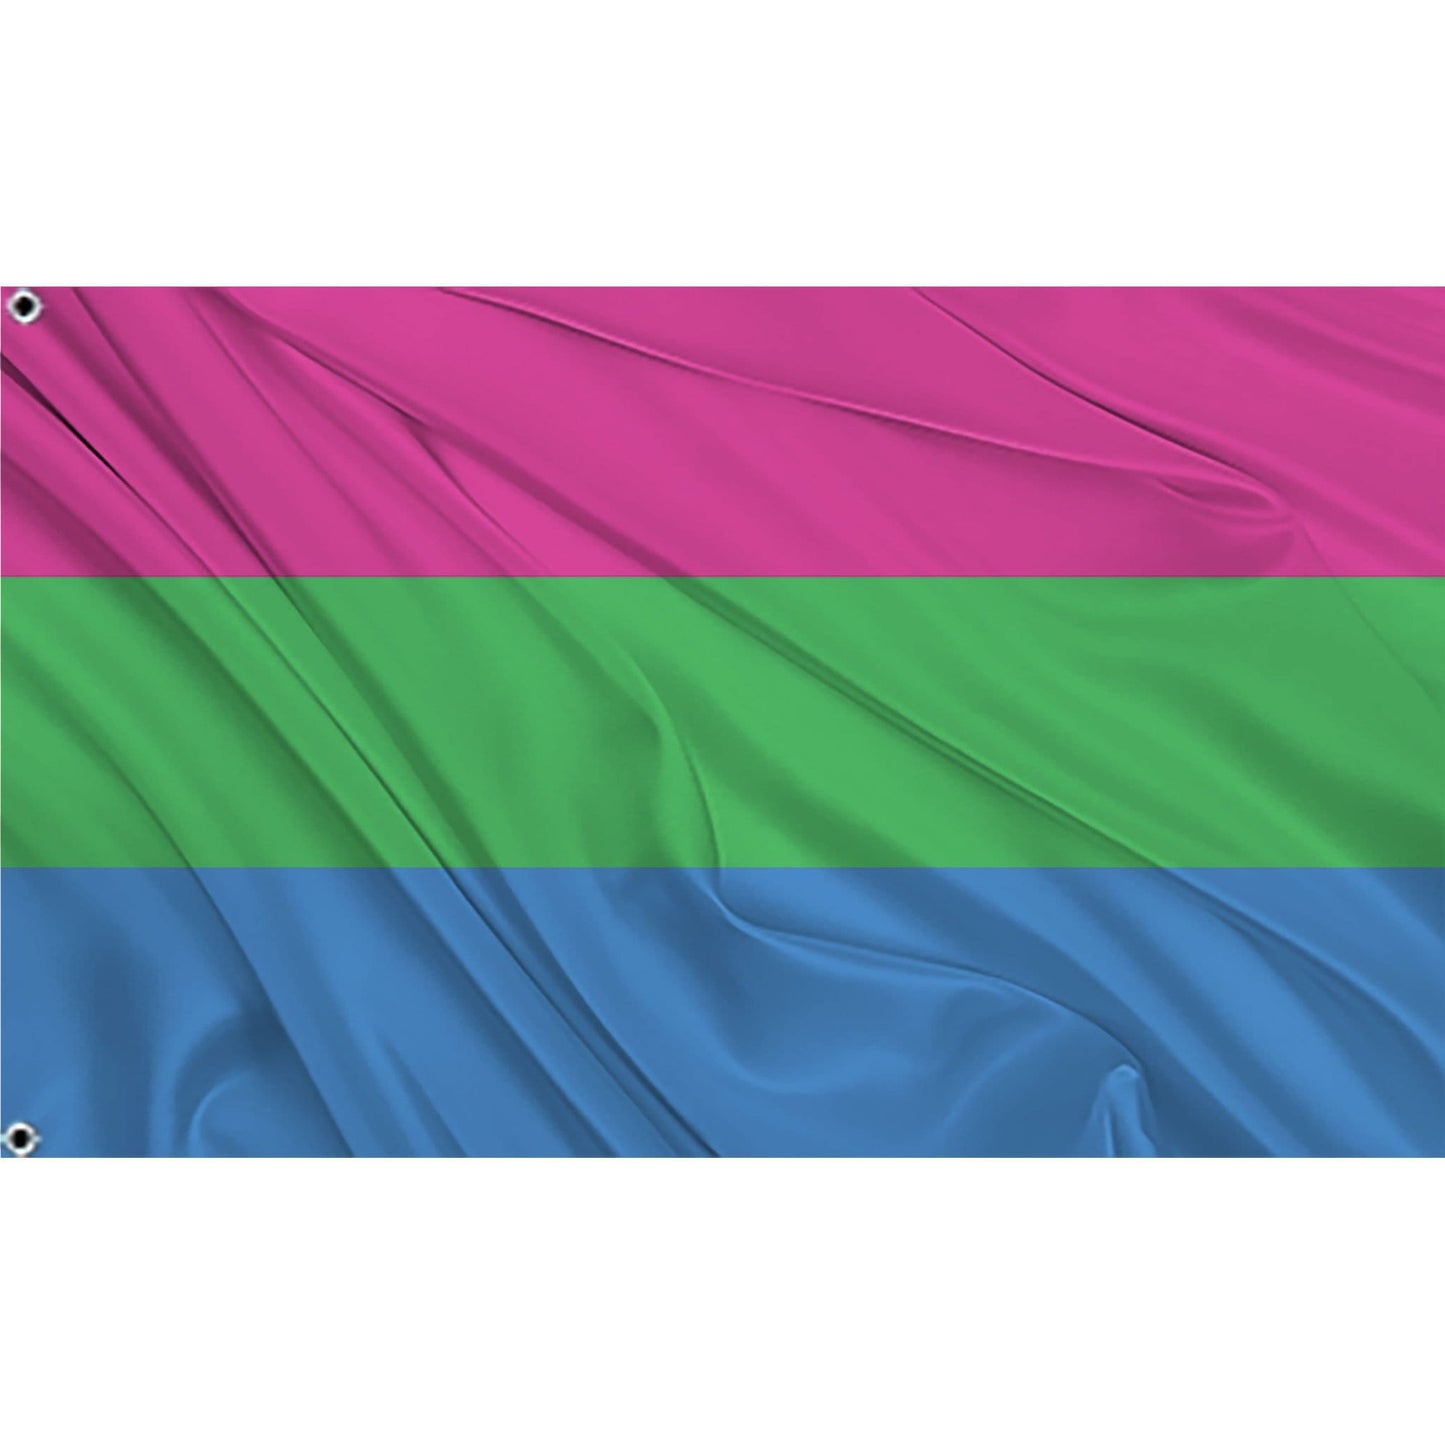 festflags 6 X 9 Inch Rectangle / Single Sided Polysexuality Pride Flags